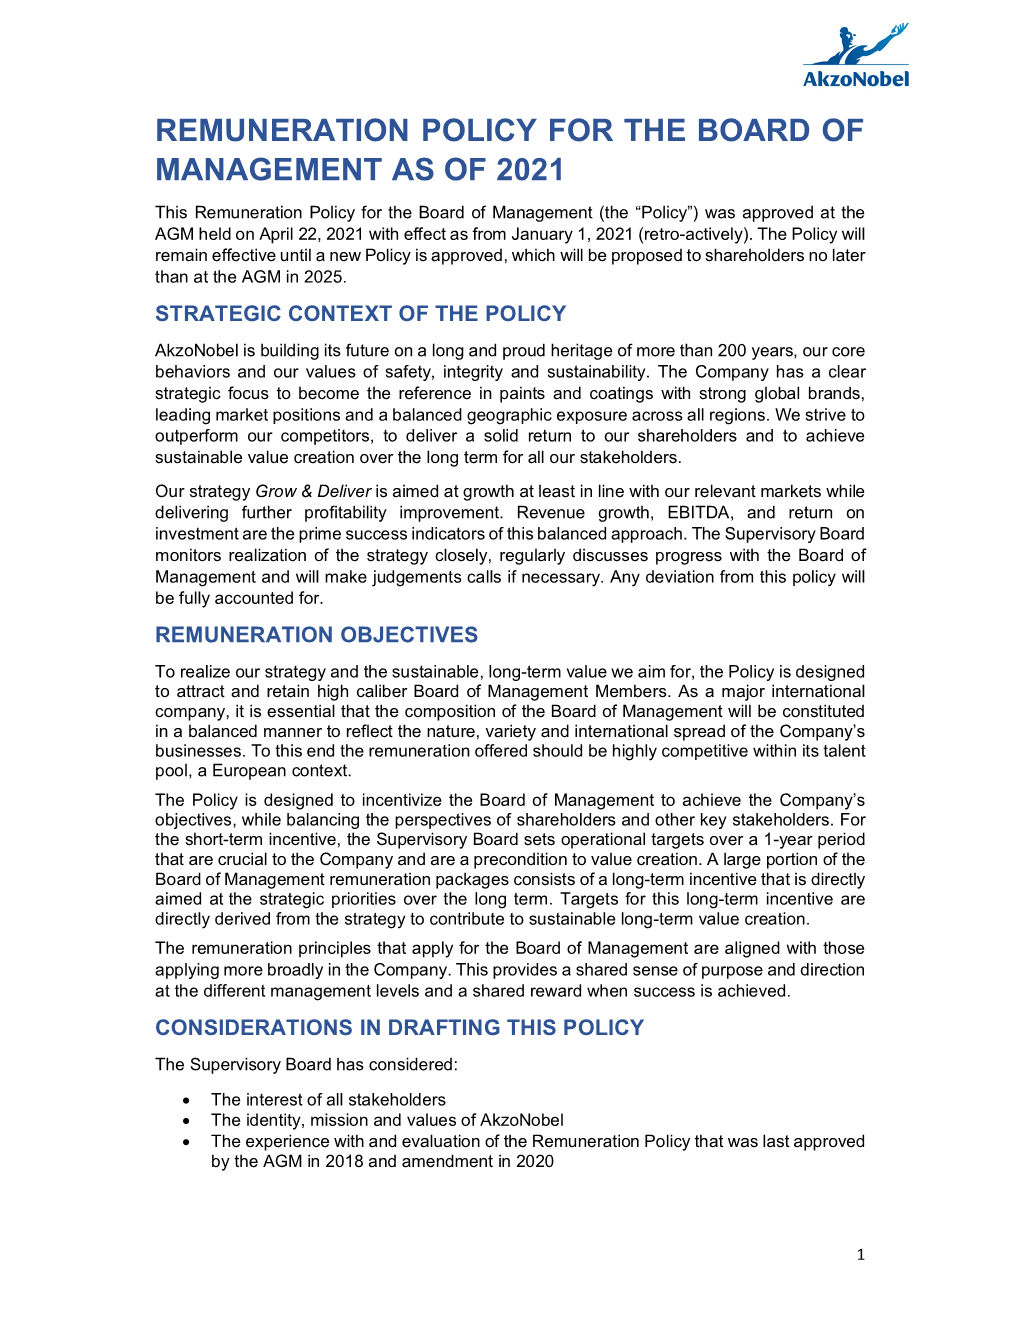 Remuneration Policy for the Board of Management As of 2021